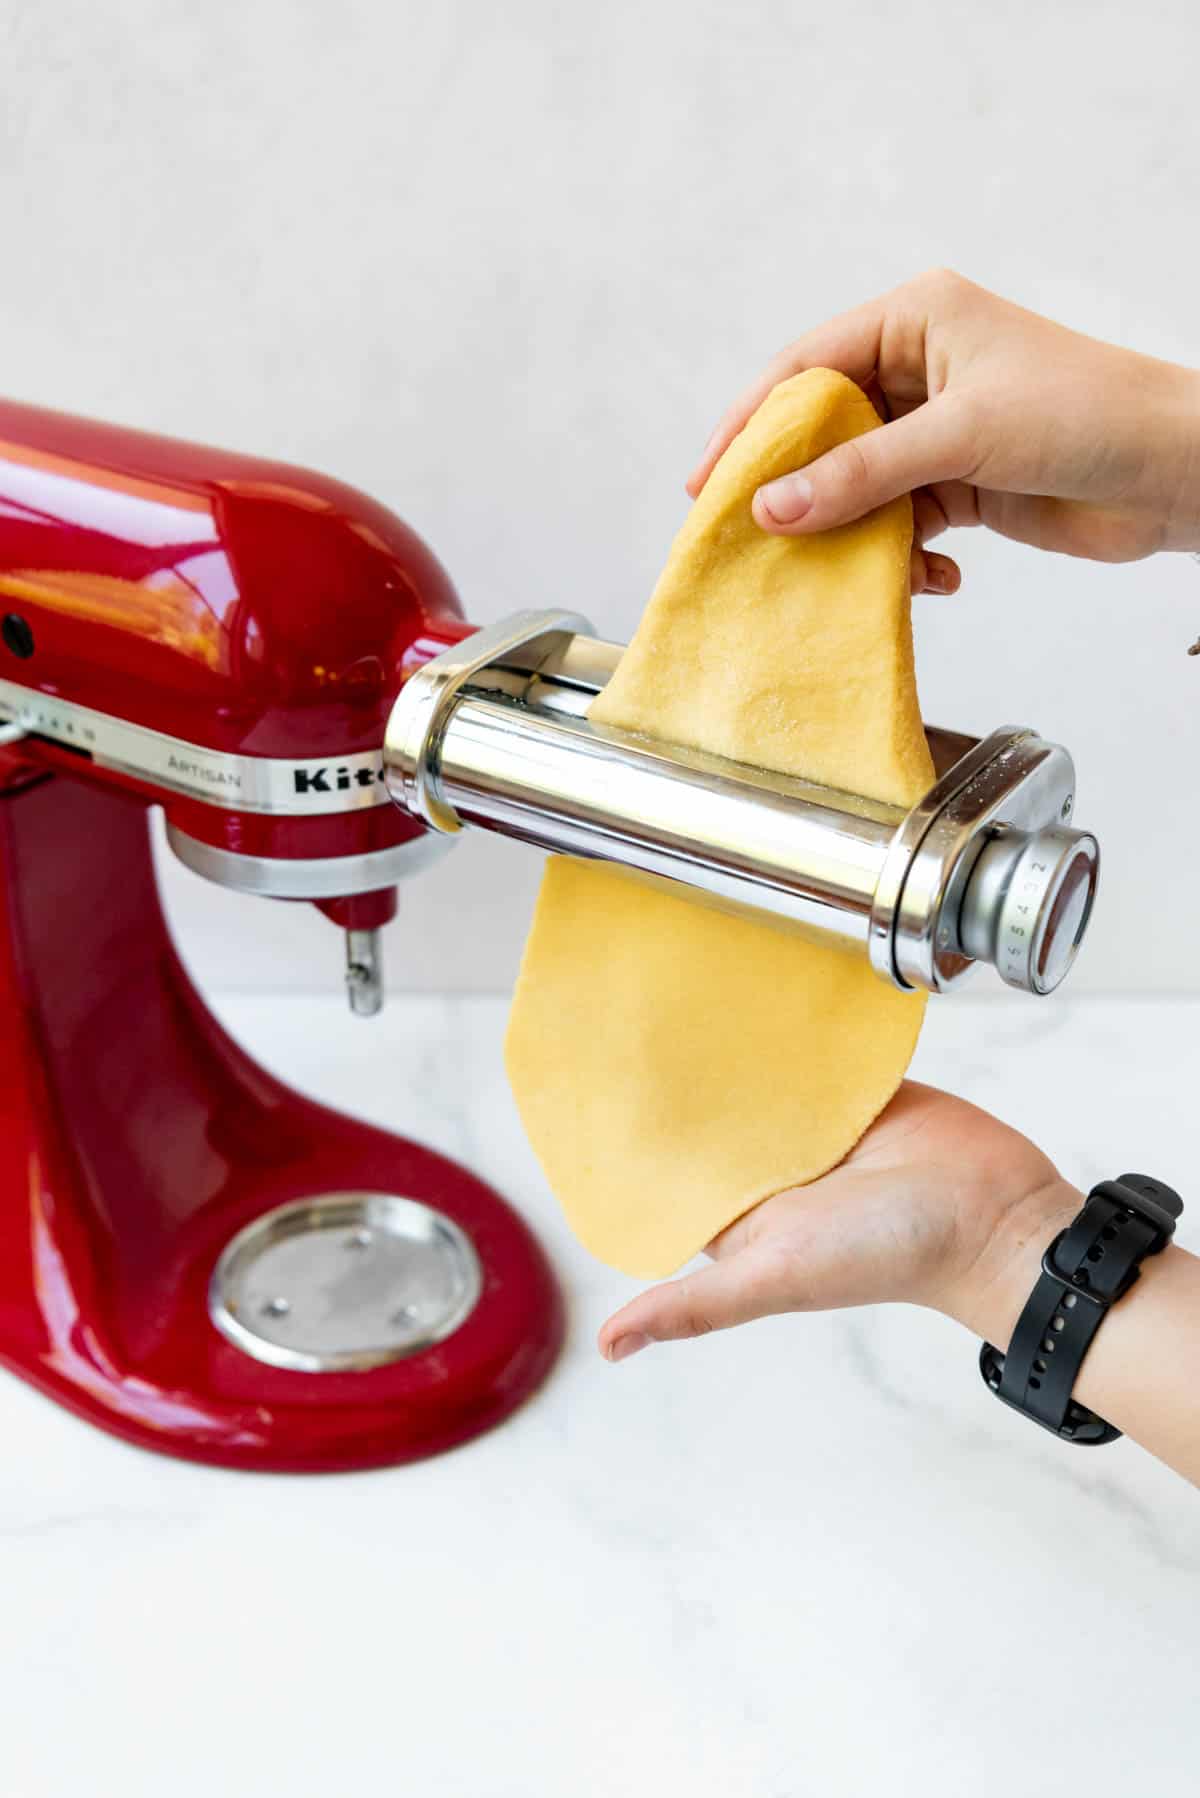 A sheet of fresh pasta dough coming out of a pasta roller KitchenAid attachment.